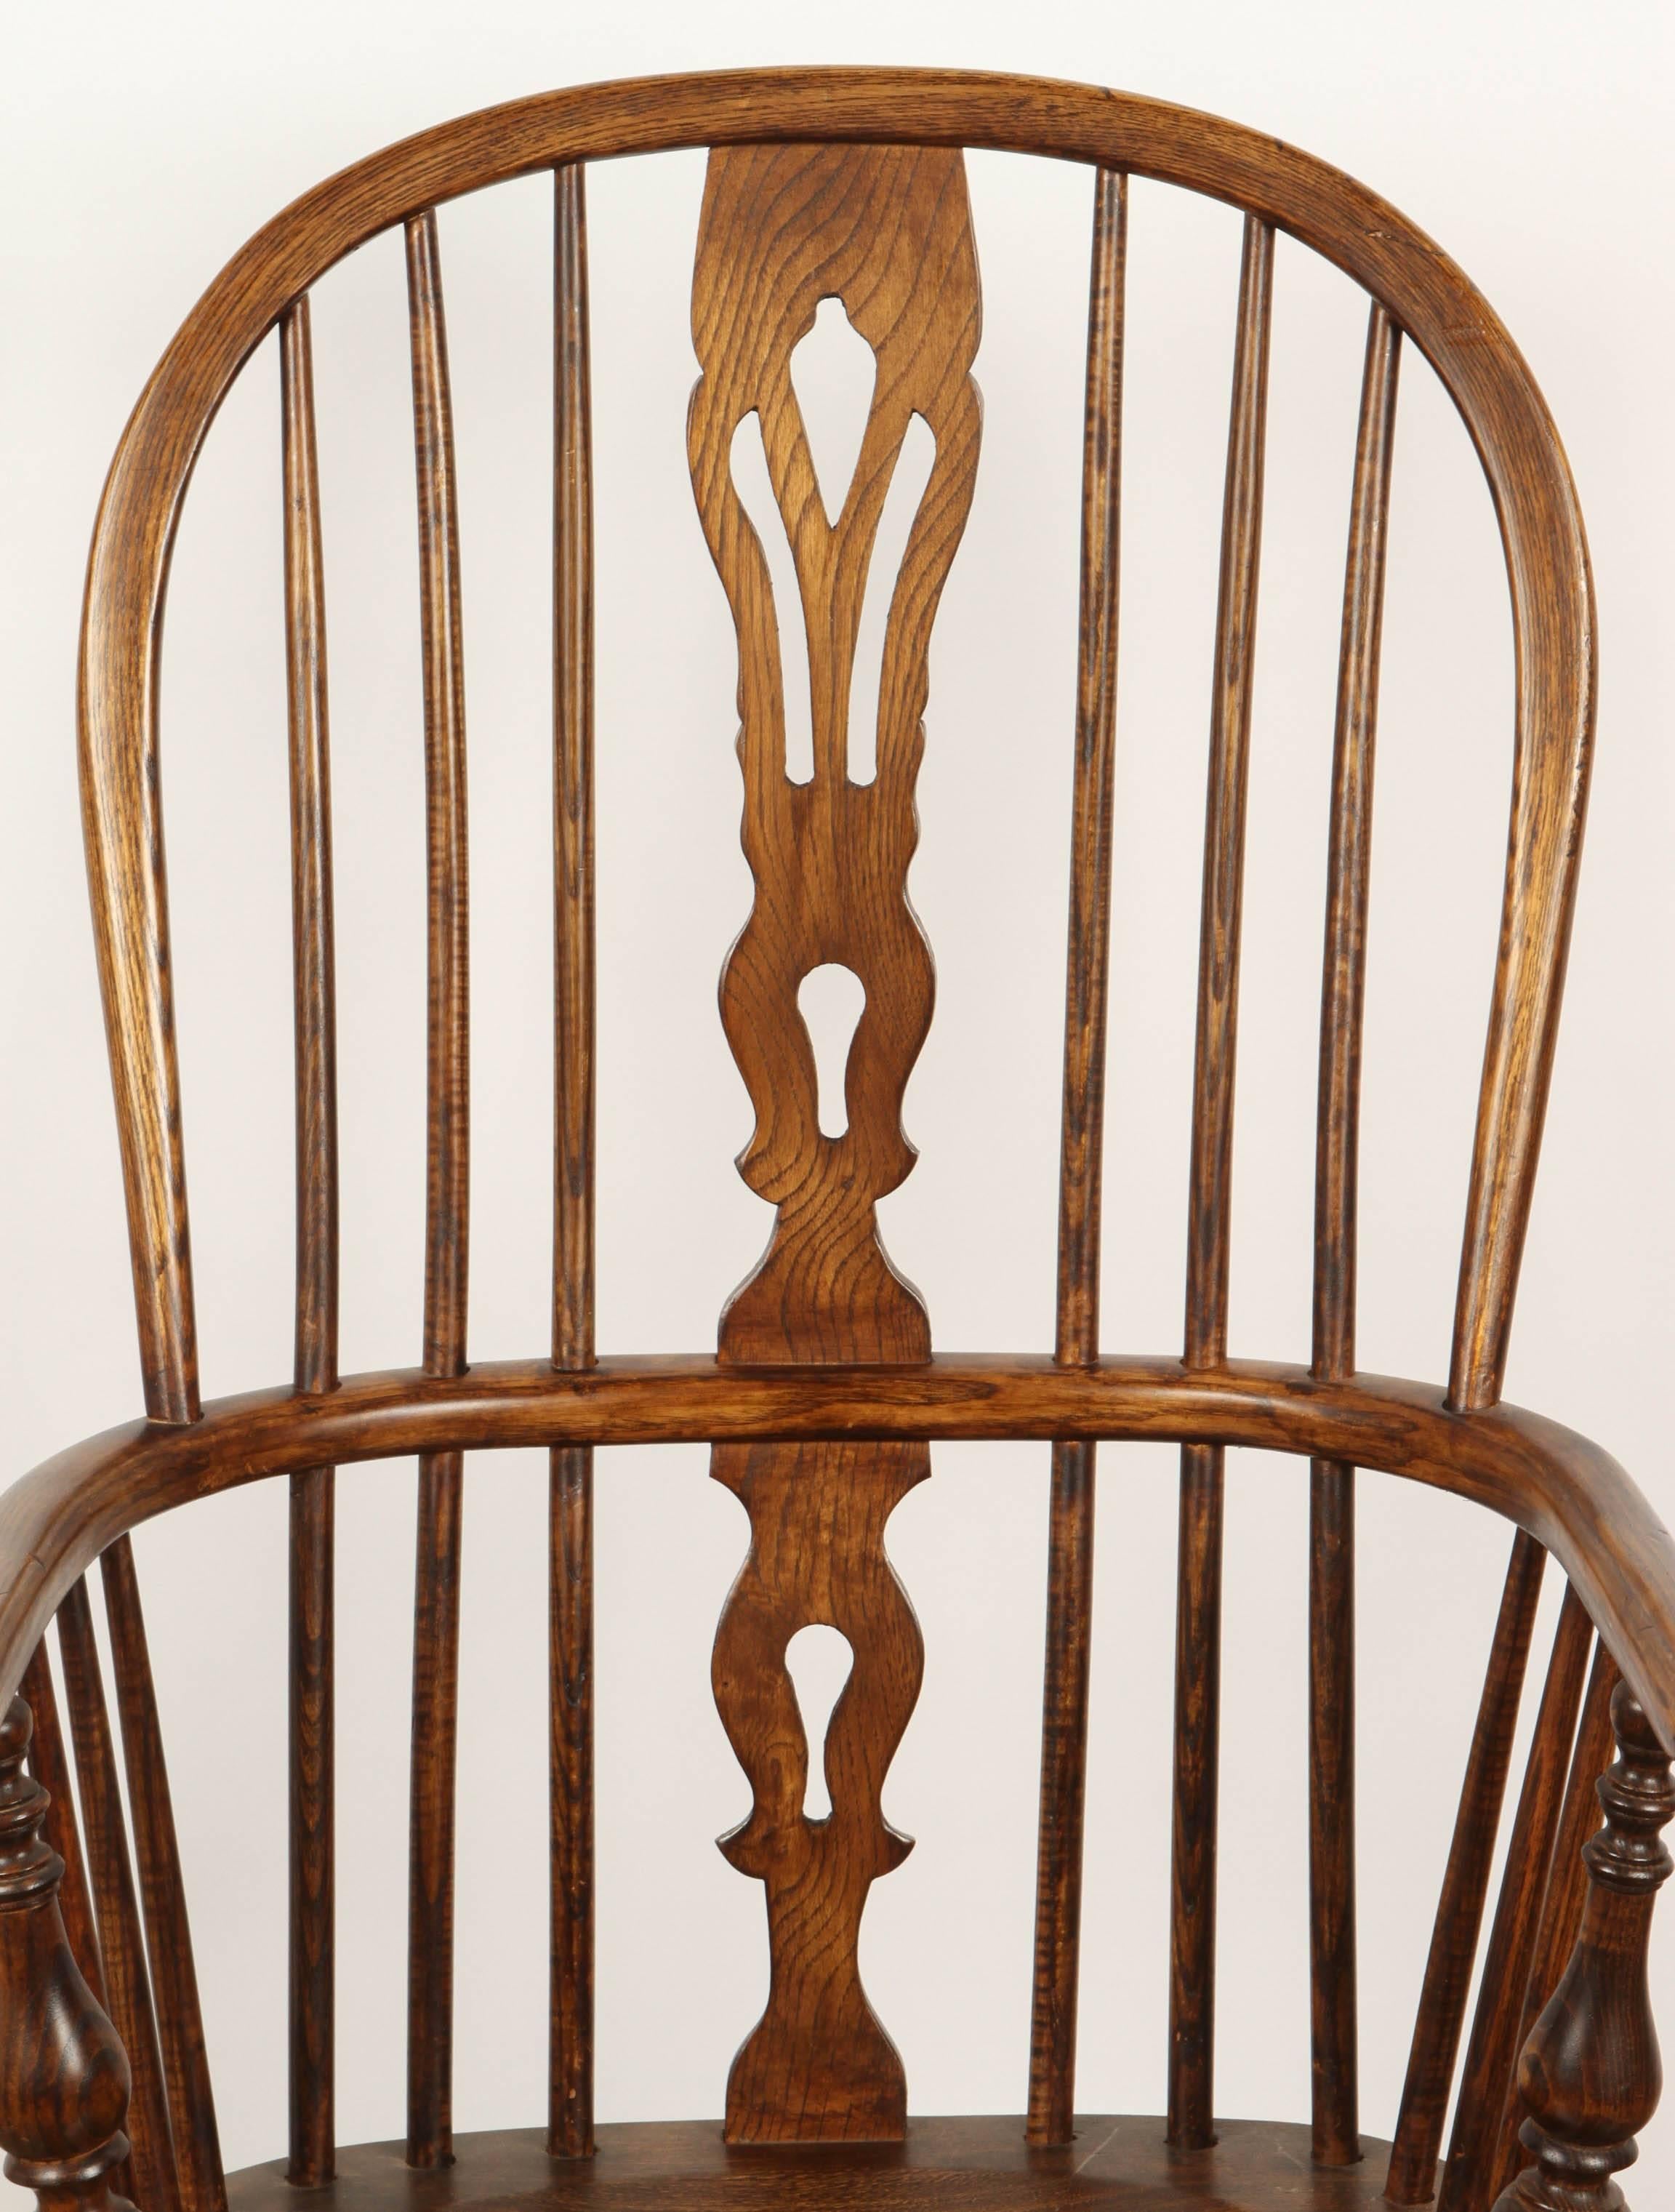 Wood One English Yew High Back Chair